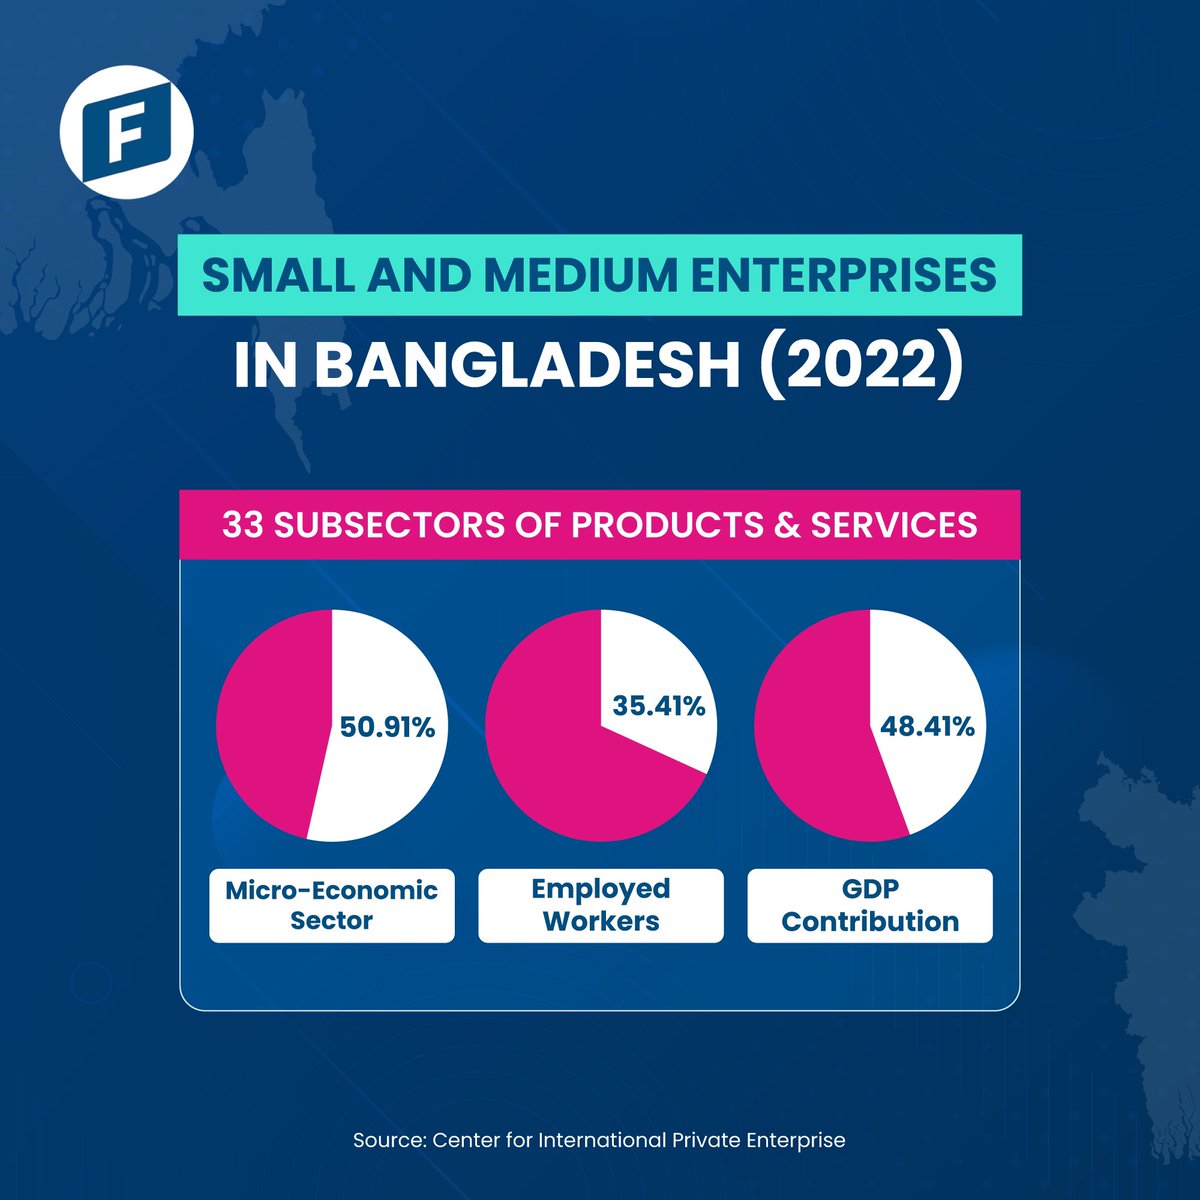 #MSMEs account for 90% of #businesses, 60-70% of #employment & 50% of #GDP worldwide.
Galvanising MSMEs worldwide by supporting #women & #youth #entrepreneurship & resilient #supplychains benefiting #workers & the #environment is #freedom

#MicroSmallandMediumsizedEnterprises Day